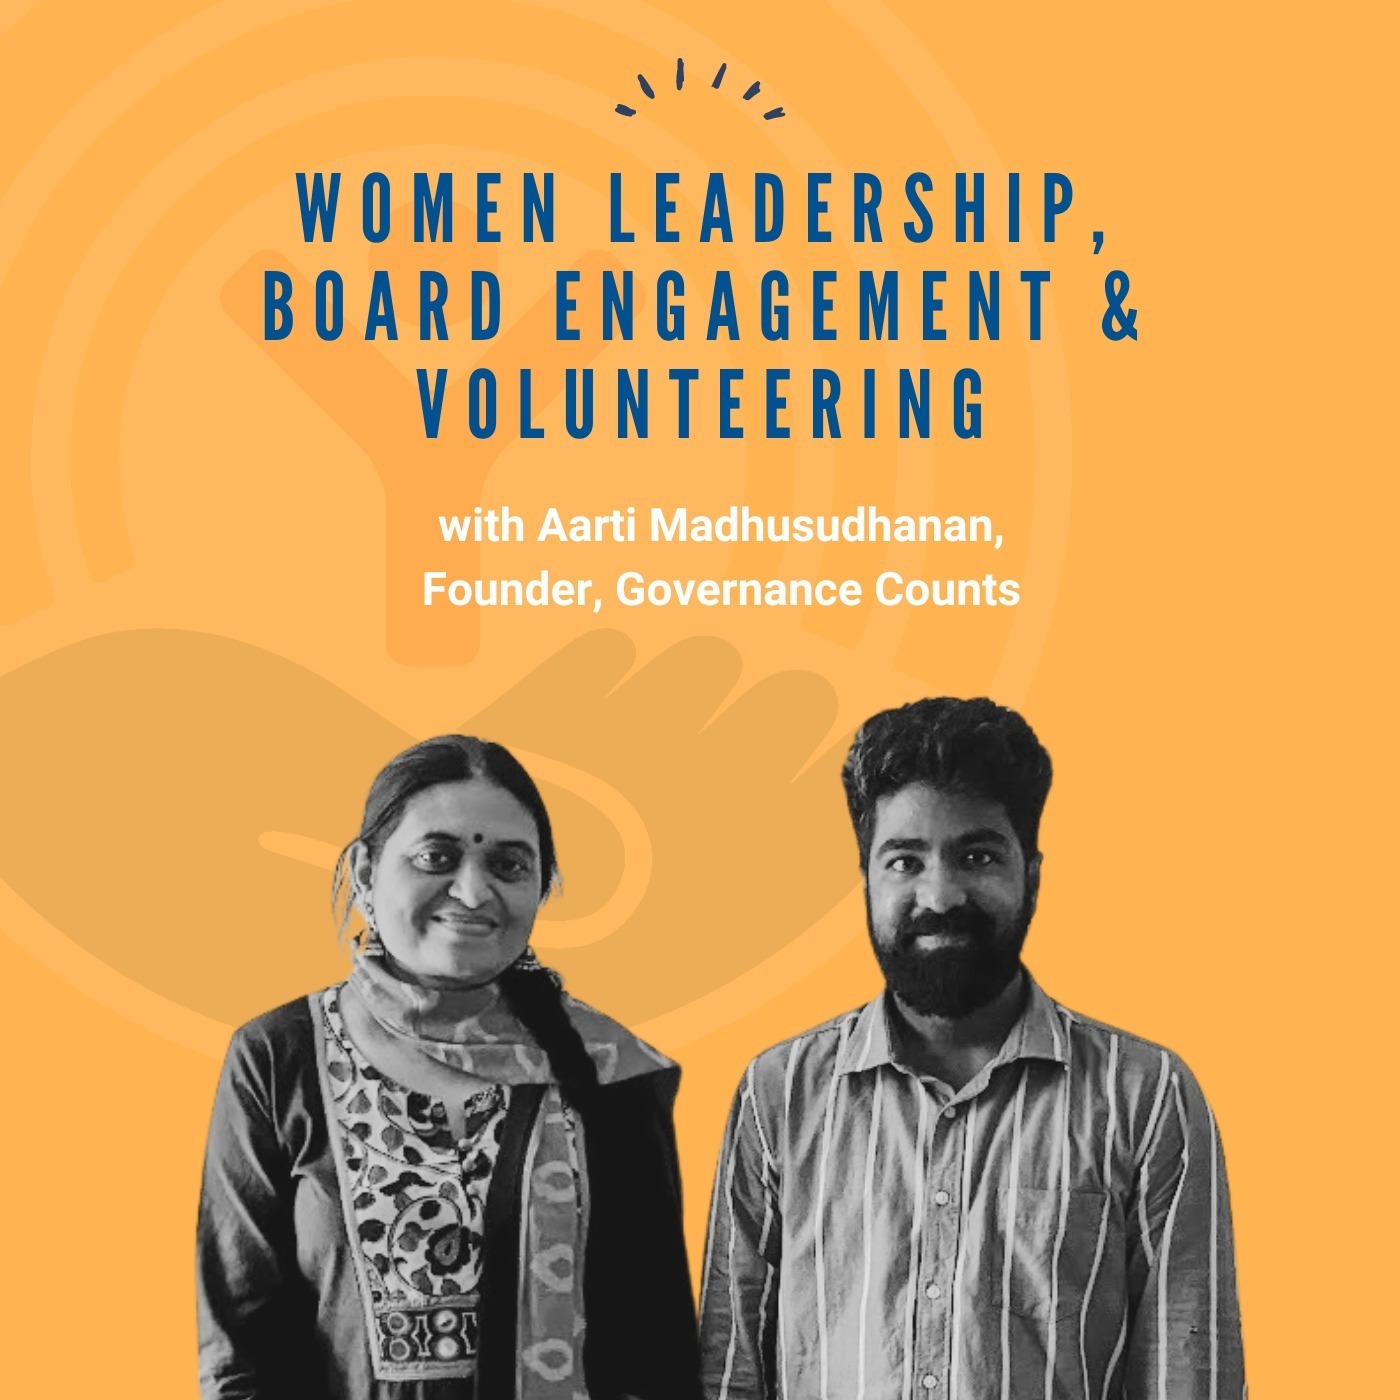 A Conversation on Women Leadership, Board Engagement, and Volunteering with Aarti Madhusudhan, Founder, Governance Counts